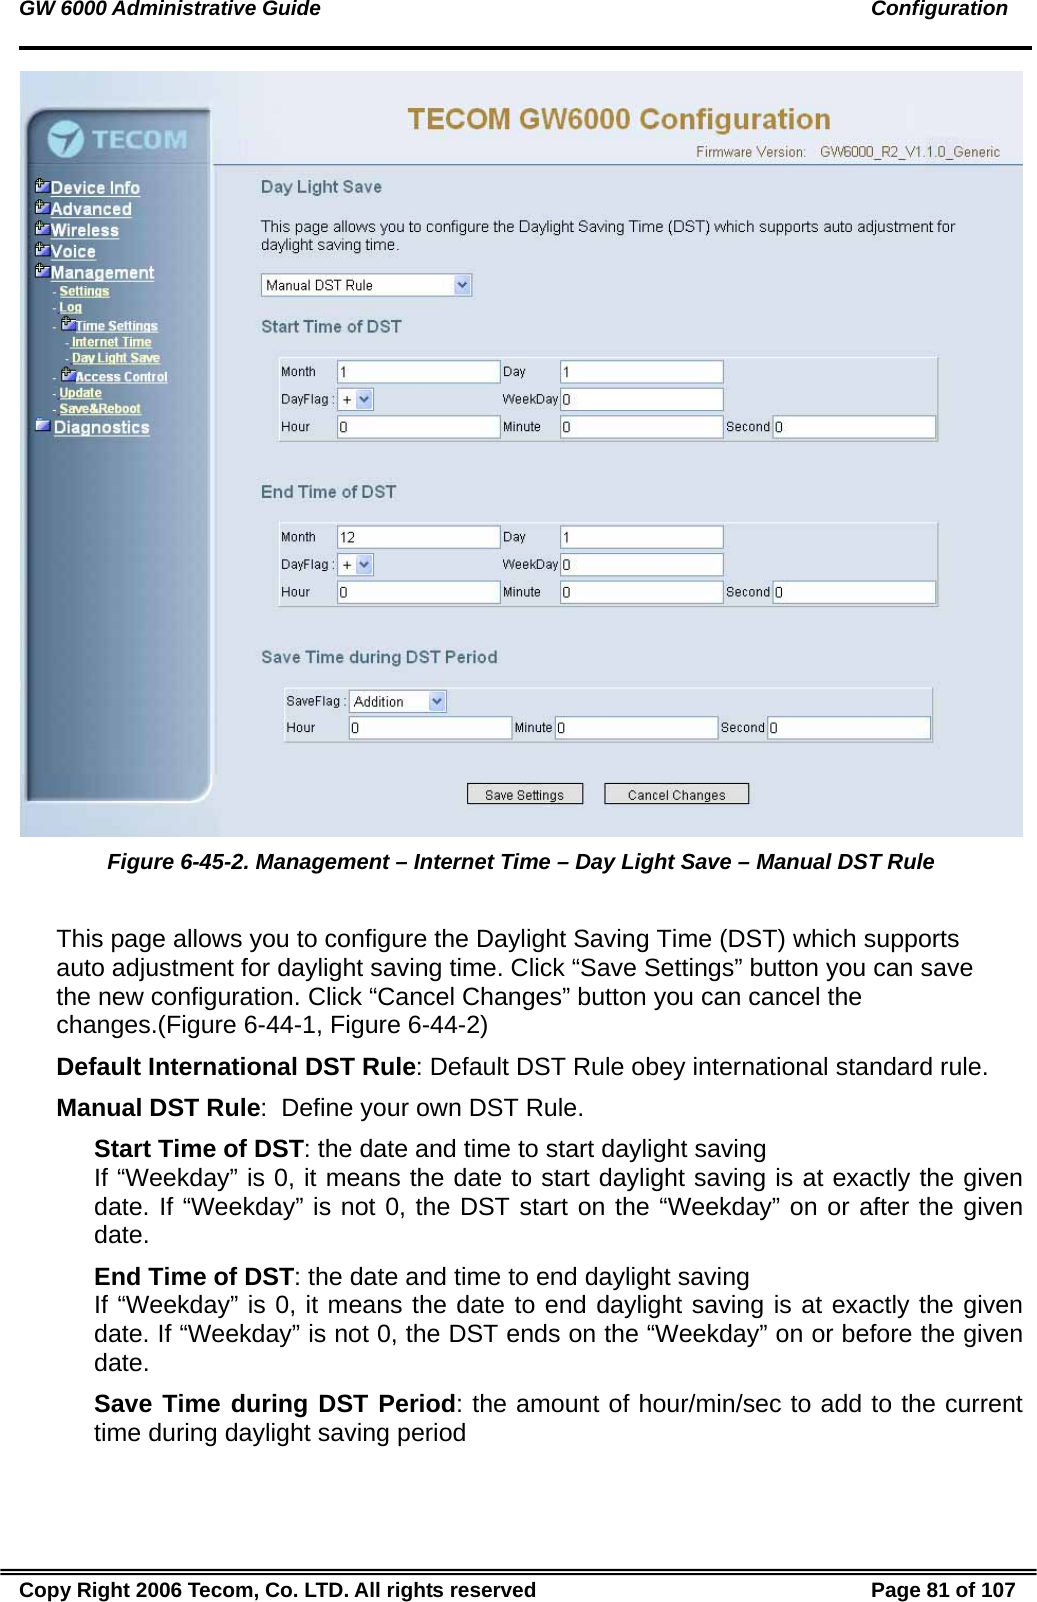 GW 6000 Administrative Guide                                                                                               Configuration  Figure 6-45-2. Management – Internet Time – Day Light Save – Manual DST Rule  This page allows you to configure the Daylight Saving Time (DST) which supports auto adjustment for daylight saving time. Click “Save Settings” button you can save the new configuration. Click “Cancel Changes” button you can cancel the changes.(Figure 6-44-1, Figure 6-44-2) Default International DST Rule: Default DST Rule obey international standard rule. Manual DST Rule:  Define your own DST Rule. Start Time of DST: the date and time to start daylight saving If “Weekday” is 0, it means the date to start daylight saving is at exactly the given date. If “Weekday” is not 0, the DST start on the “Weekday” on or after the given date. End Time of DST: the date and time to end daylight saving If “Weekday” is 0, it means the date to end daylight saving is at exactly the given date. If “Weekday” is not 0, the DST ends on the “Weekday” on or before the given date. Save Time during DST Period: the amount of hour/min/sec to add to the current time during daylight saving period Copy Right 2006 Tecom, Co. LTD. All rights reserved  Page 81 of 107 